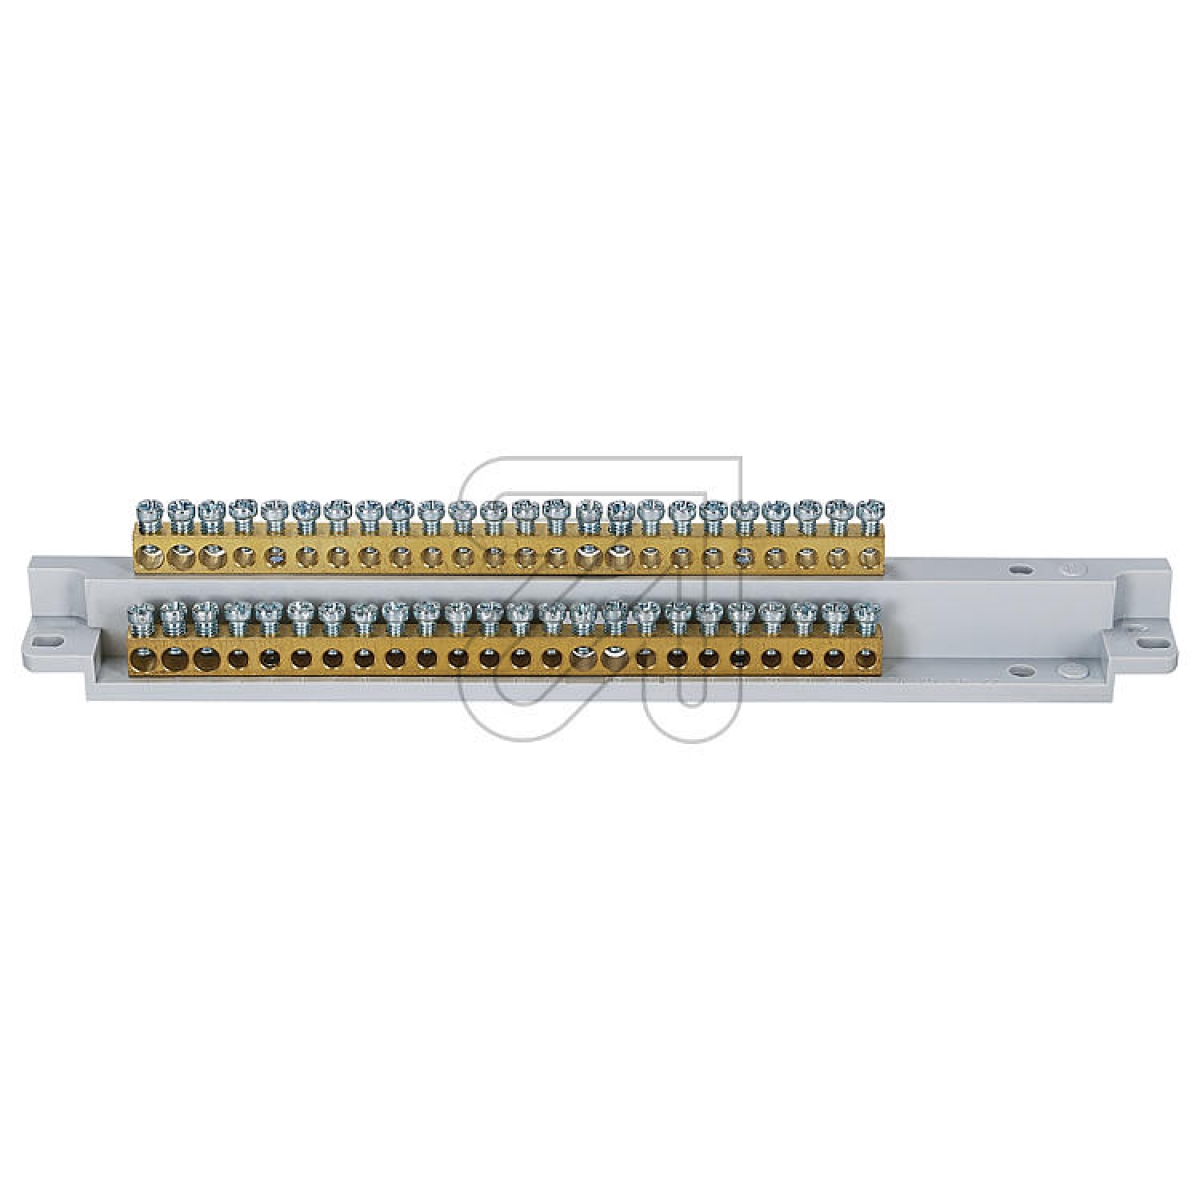 SchieglN/PE rail for additional assembly 2x24 pol. 06100003Article-No: 133990